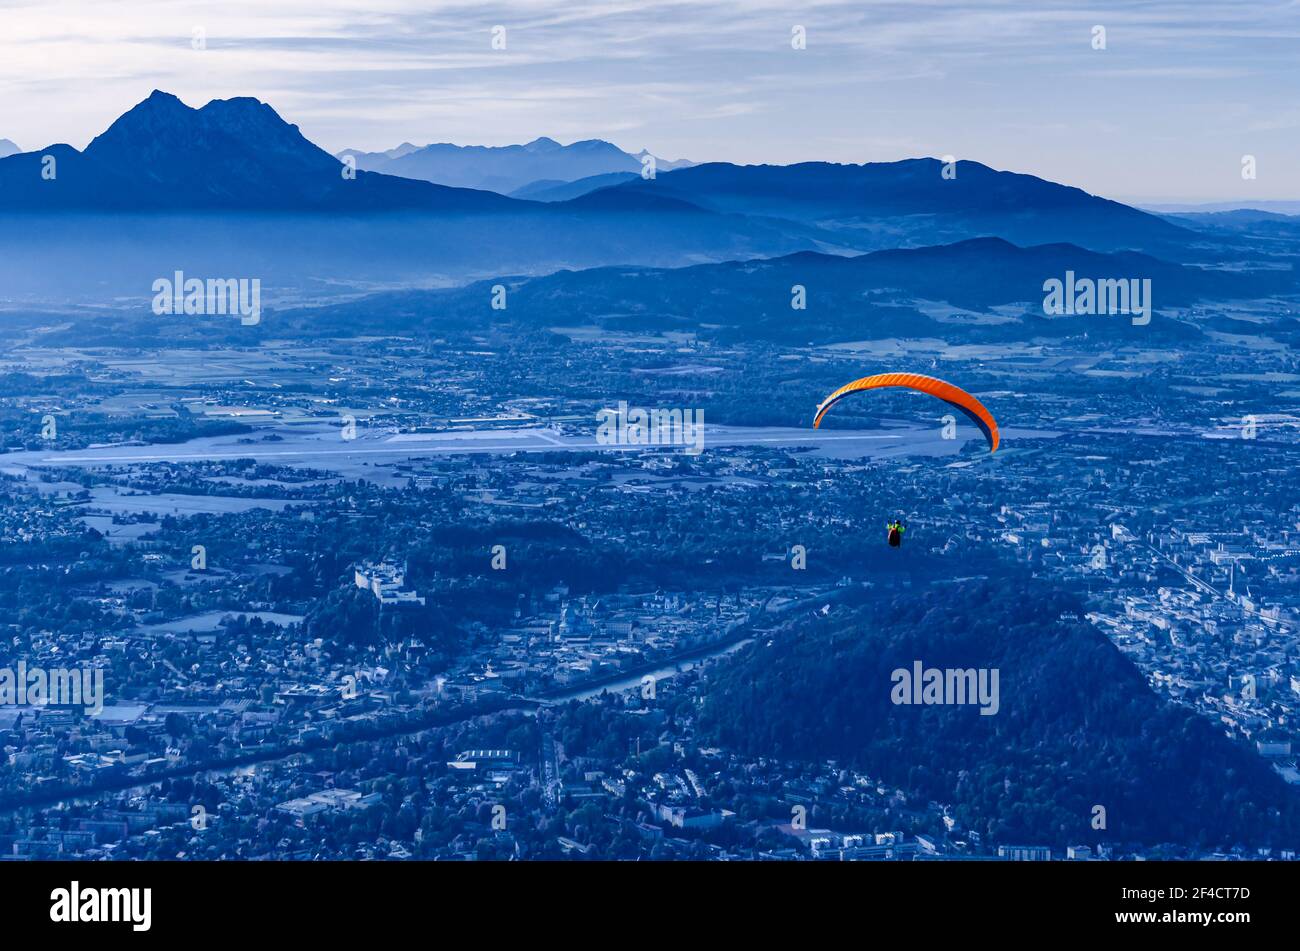 Paragliding over Salzburg in Austria, Europe. Paraglider, started from the 1287 meters high Gaisberg mountain, with view of capital city of Salzburg. Stock Photo